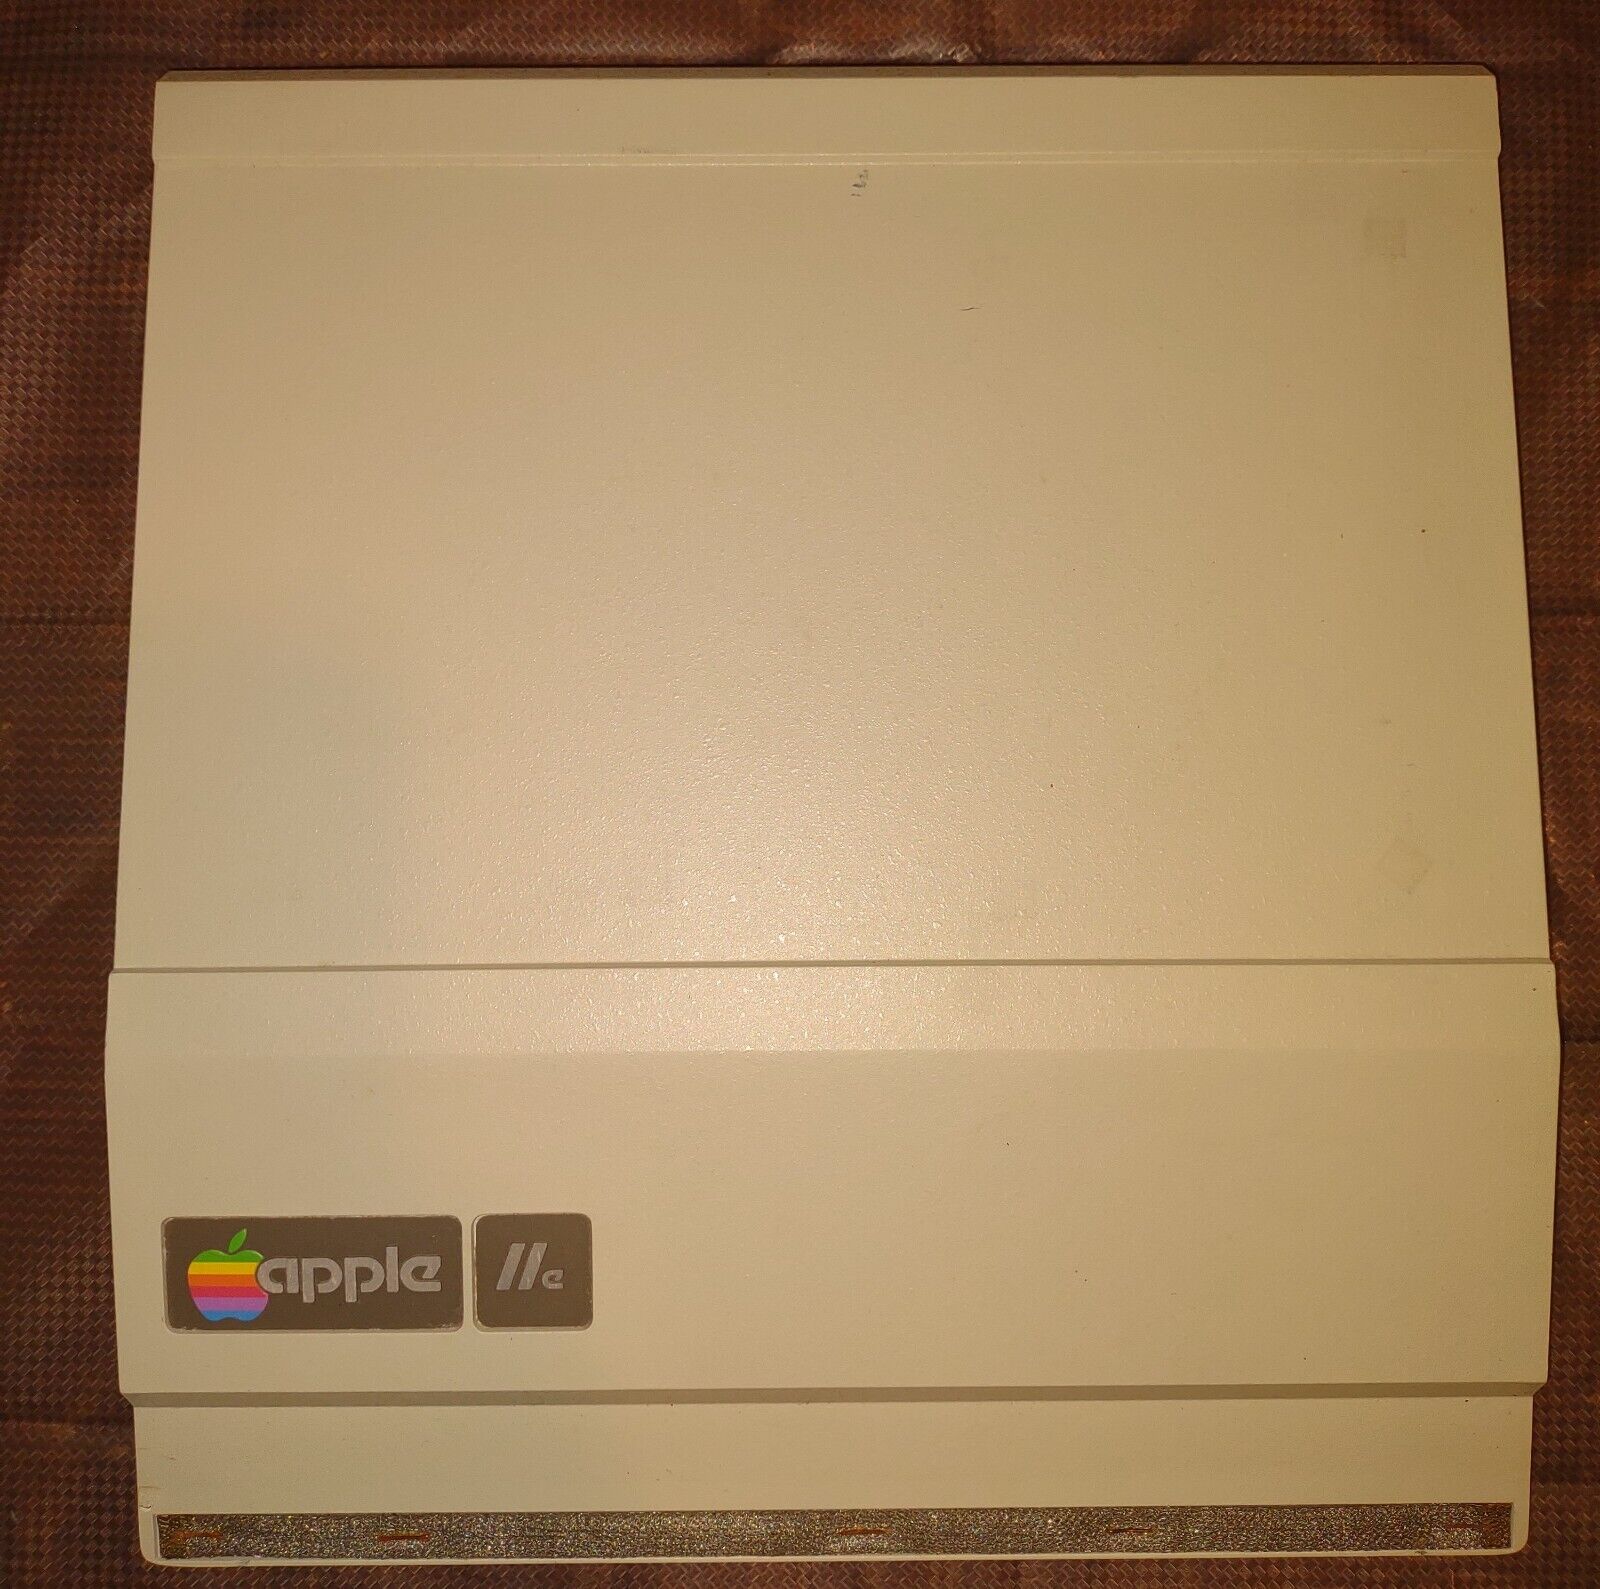 Apple IIe TOP COVER ONLY Vintage 